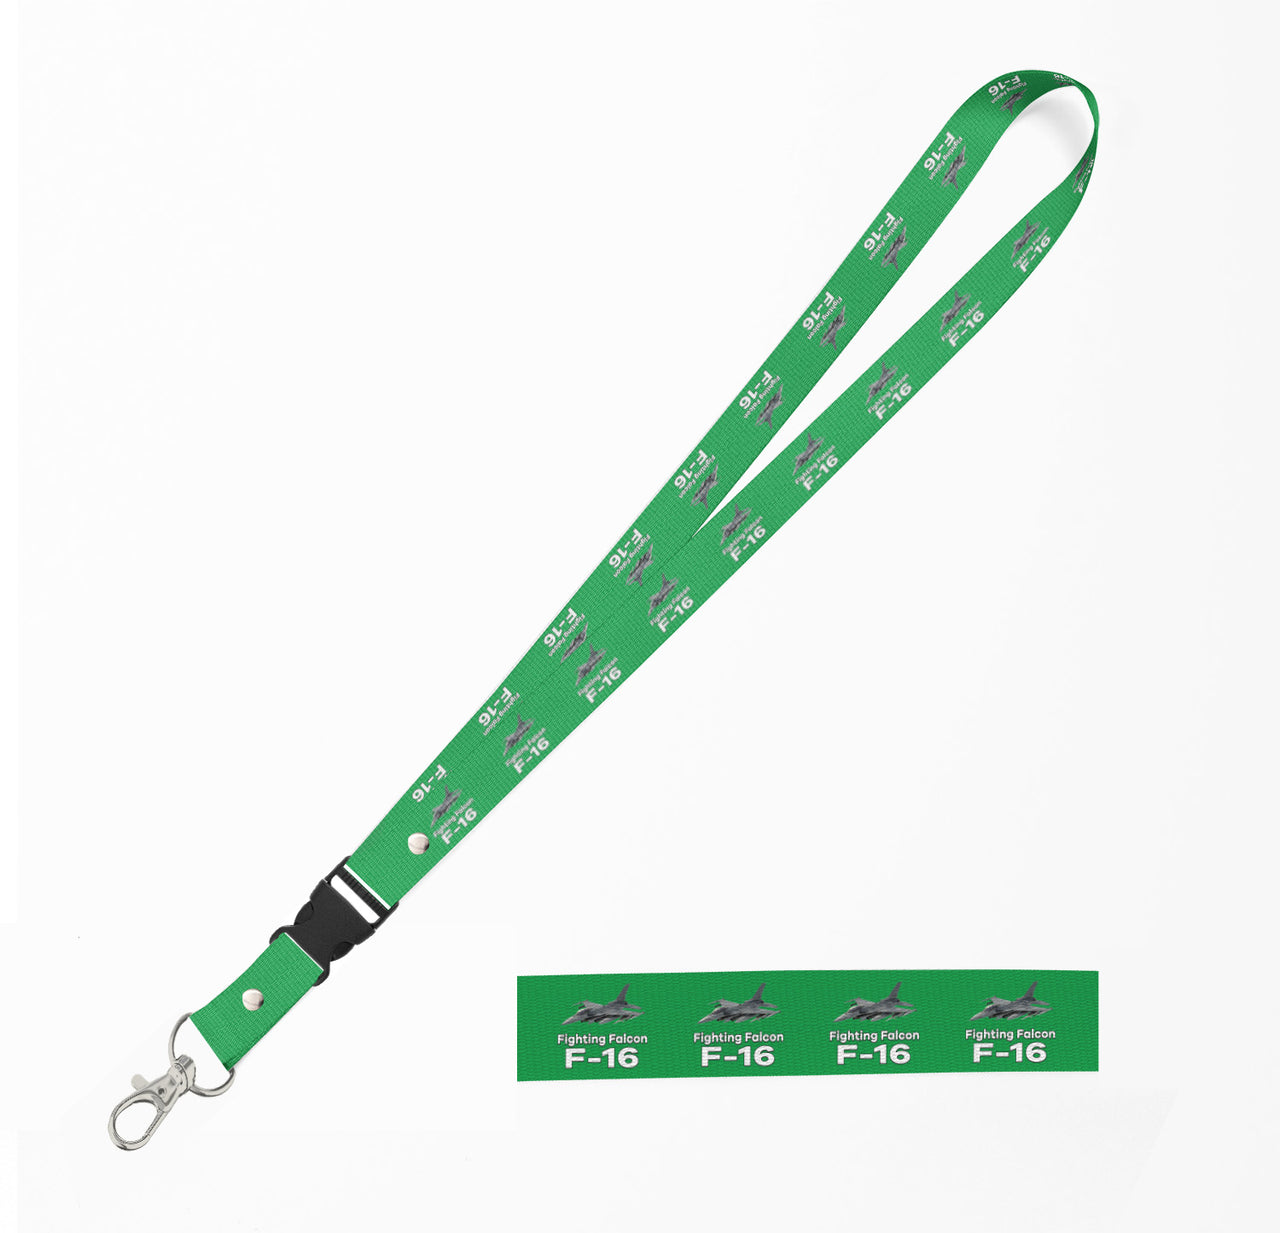 The Fighting Falcon F16 Designed Detachable Lanyard & ID Holders